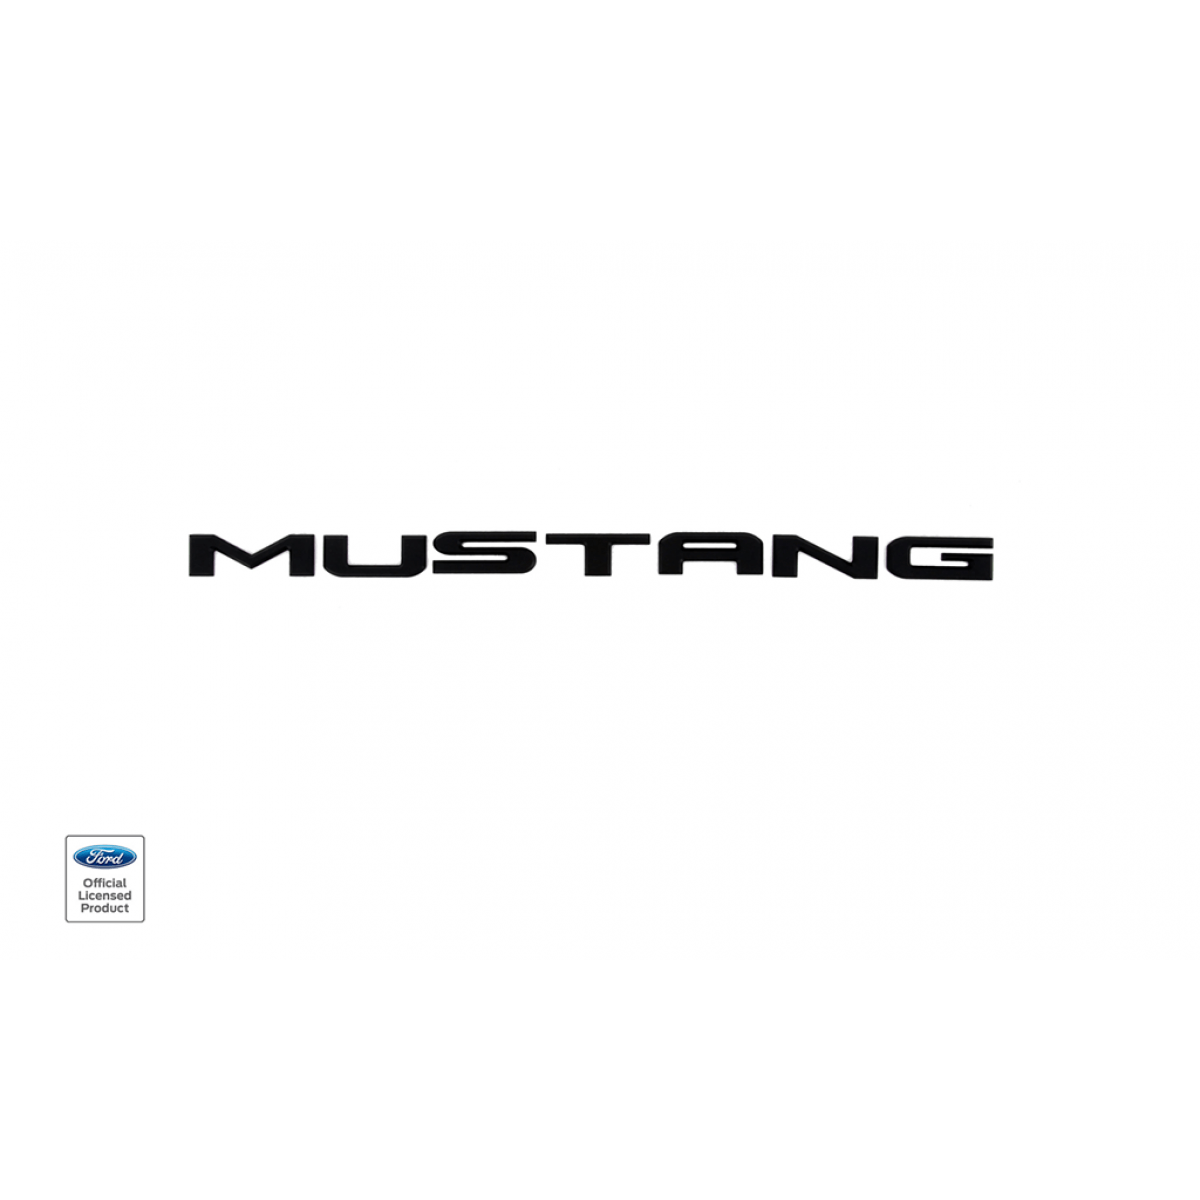 Black and White Ford Mustang Logo - 2010 2013 Ford Mustang Letters Emblem, Black